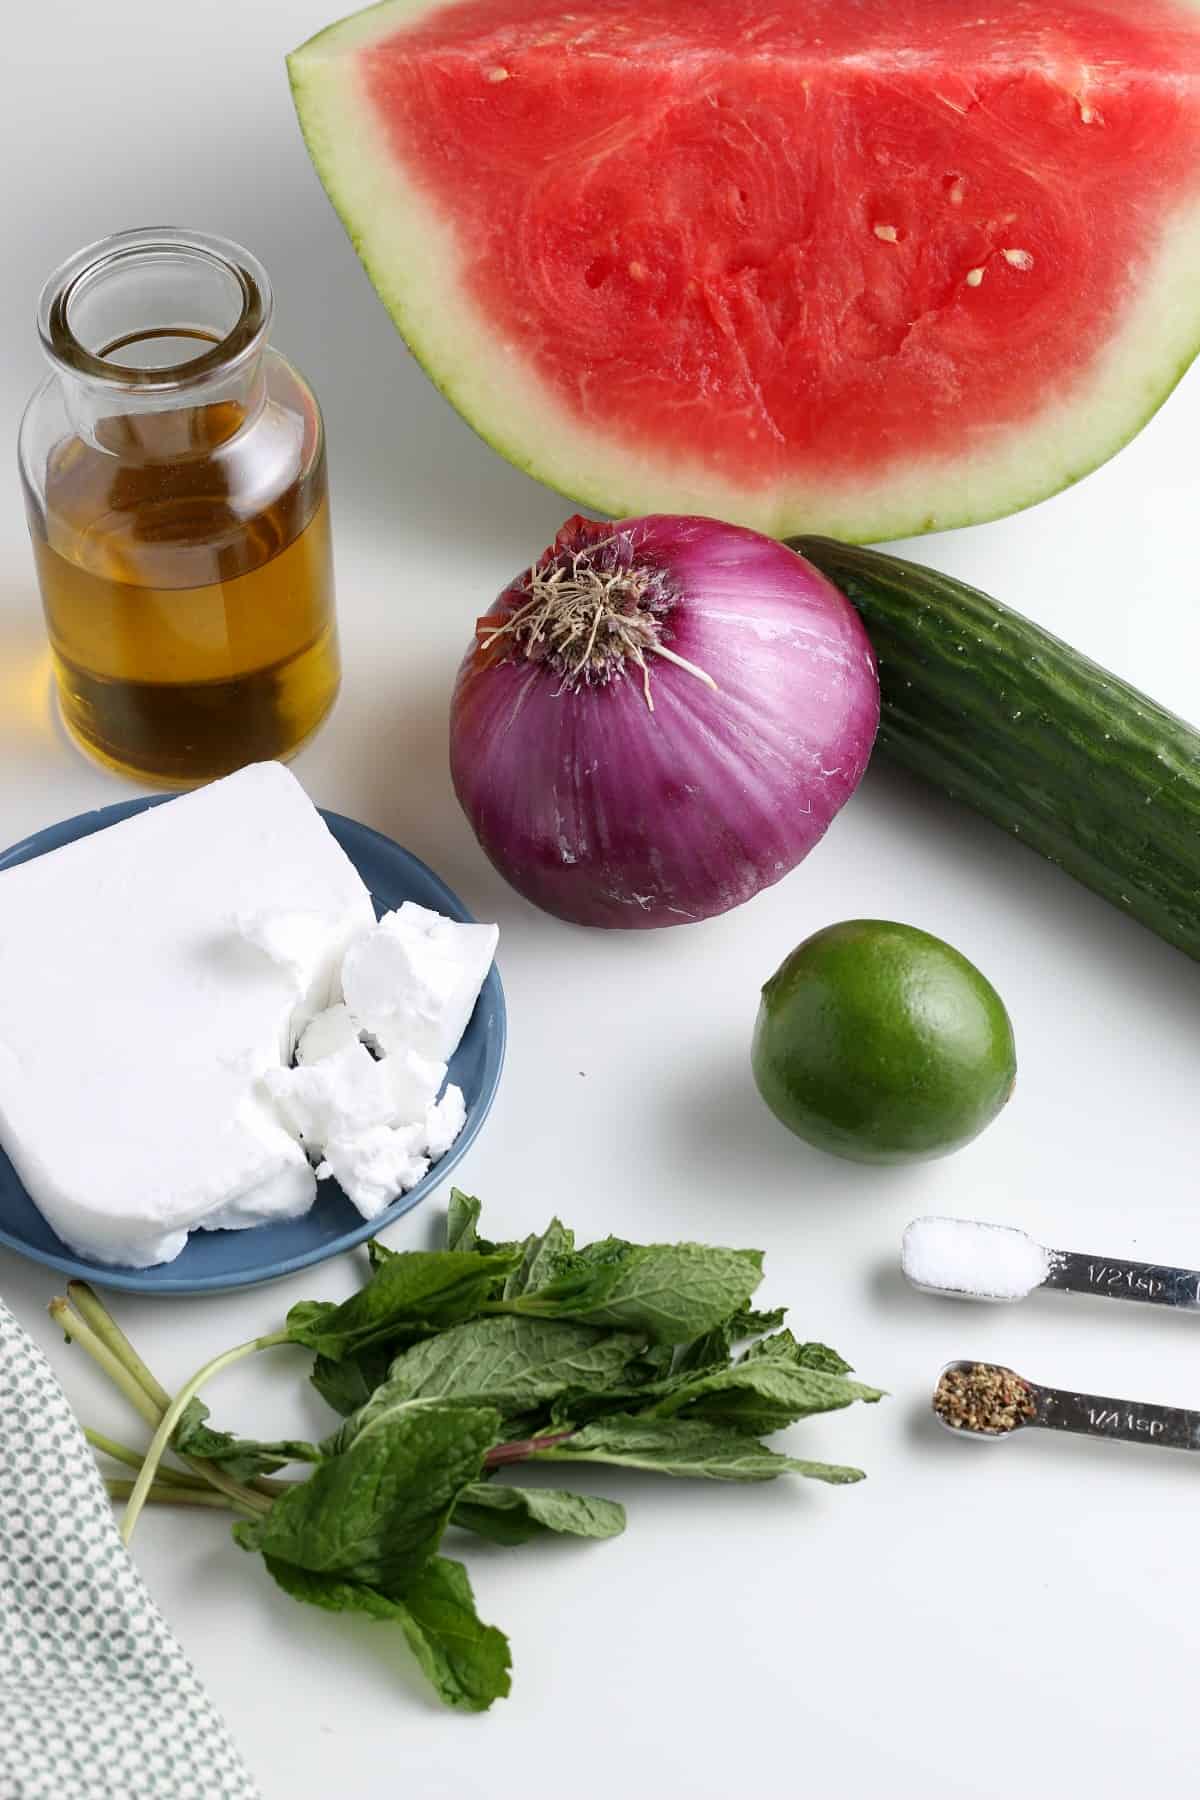 All of the ingredients for a watermelon salad against a white background. Nothing is prepped yet.